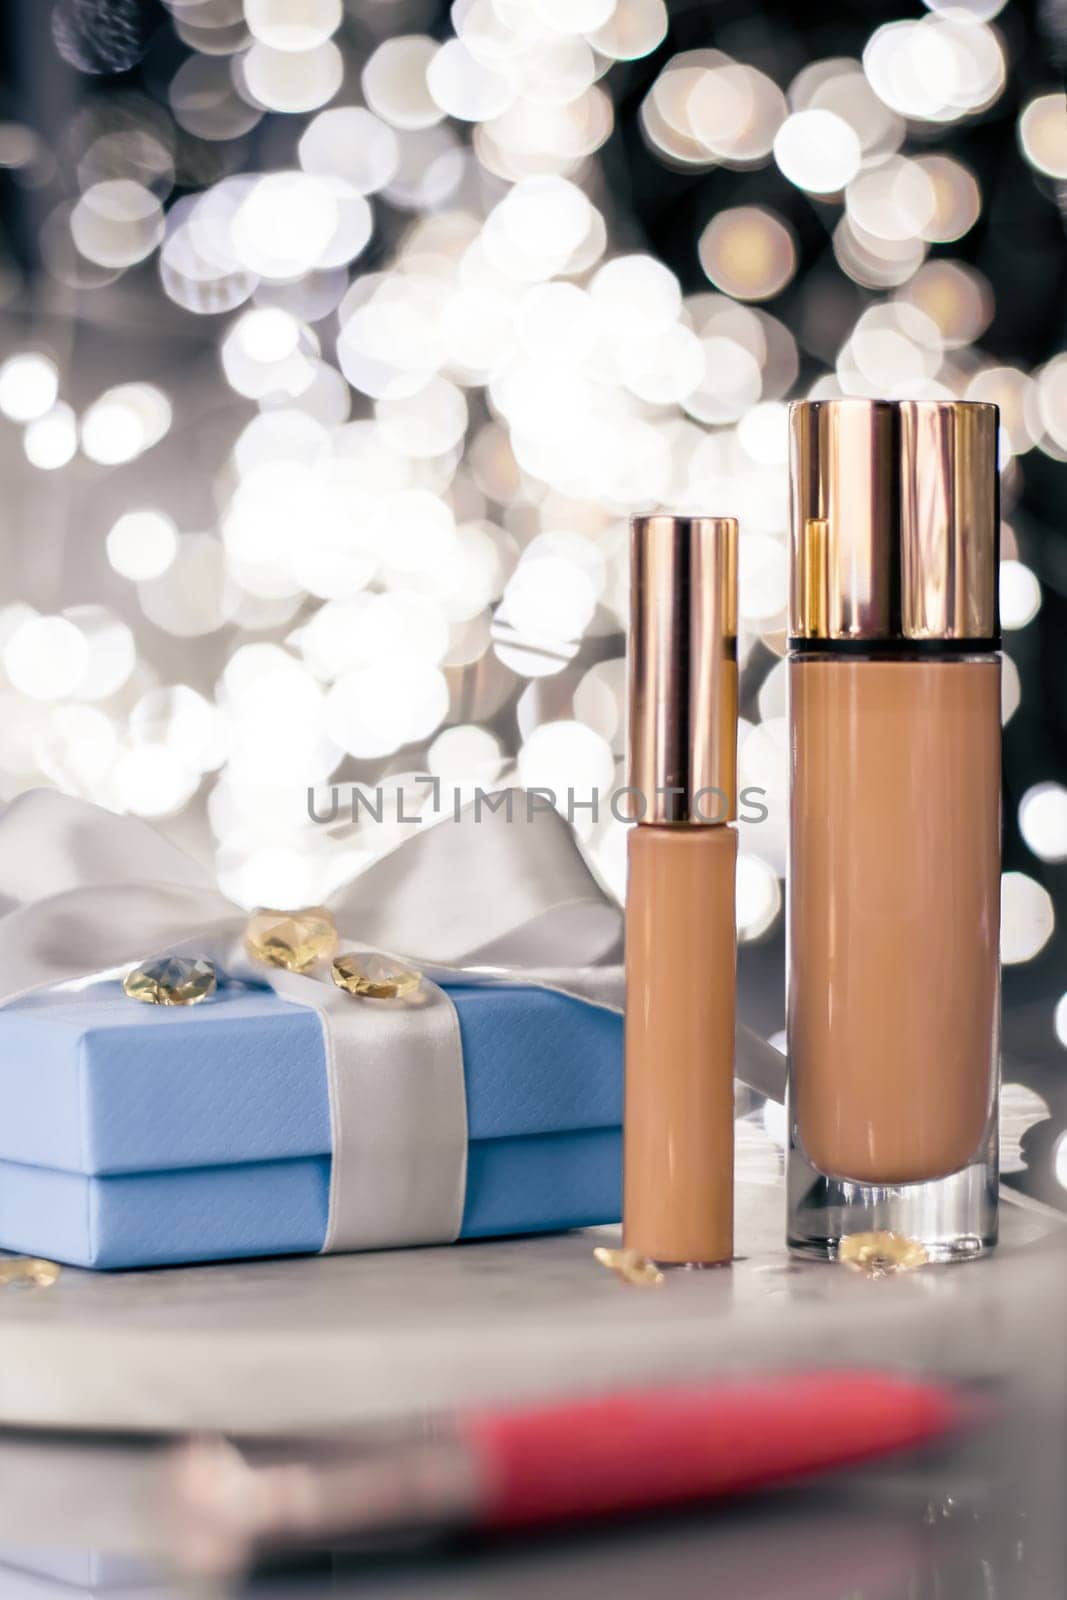 luxury make-up products as a gift - beauty, cosmetics and makeup styled concept by Anneleven